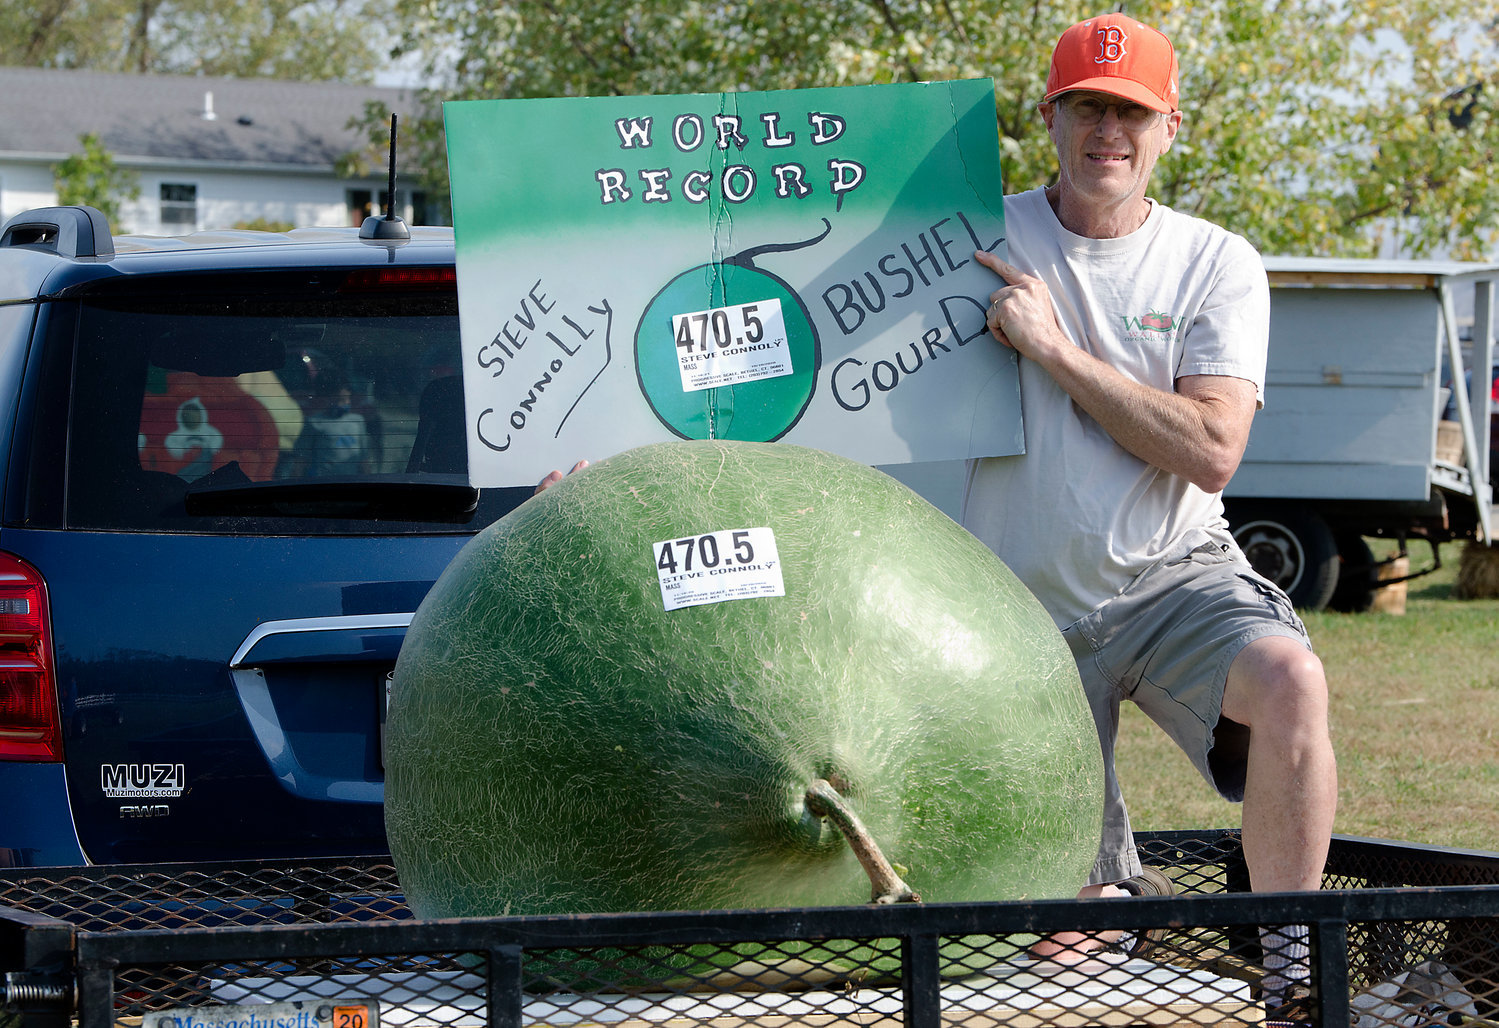 Steve Connolly with his world record bushel gourd, which weighed in at 470.5 pounds and crushed the prior record by over 100 pounds at last year’s weigh-off.